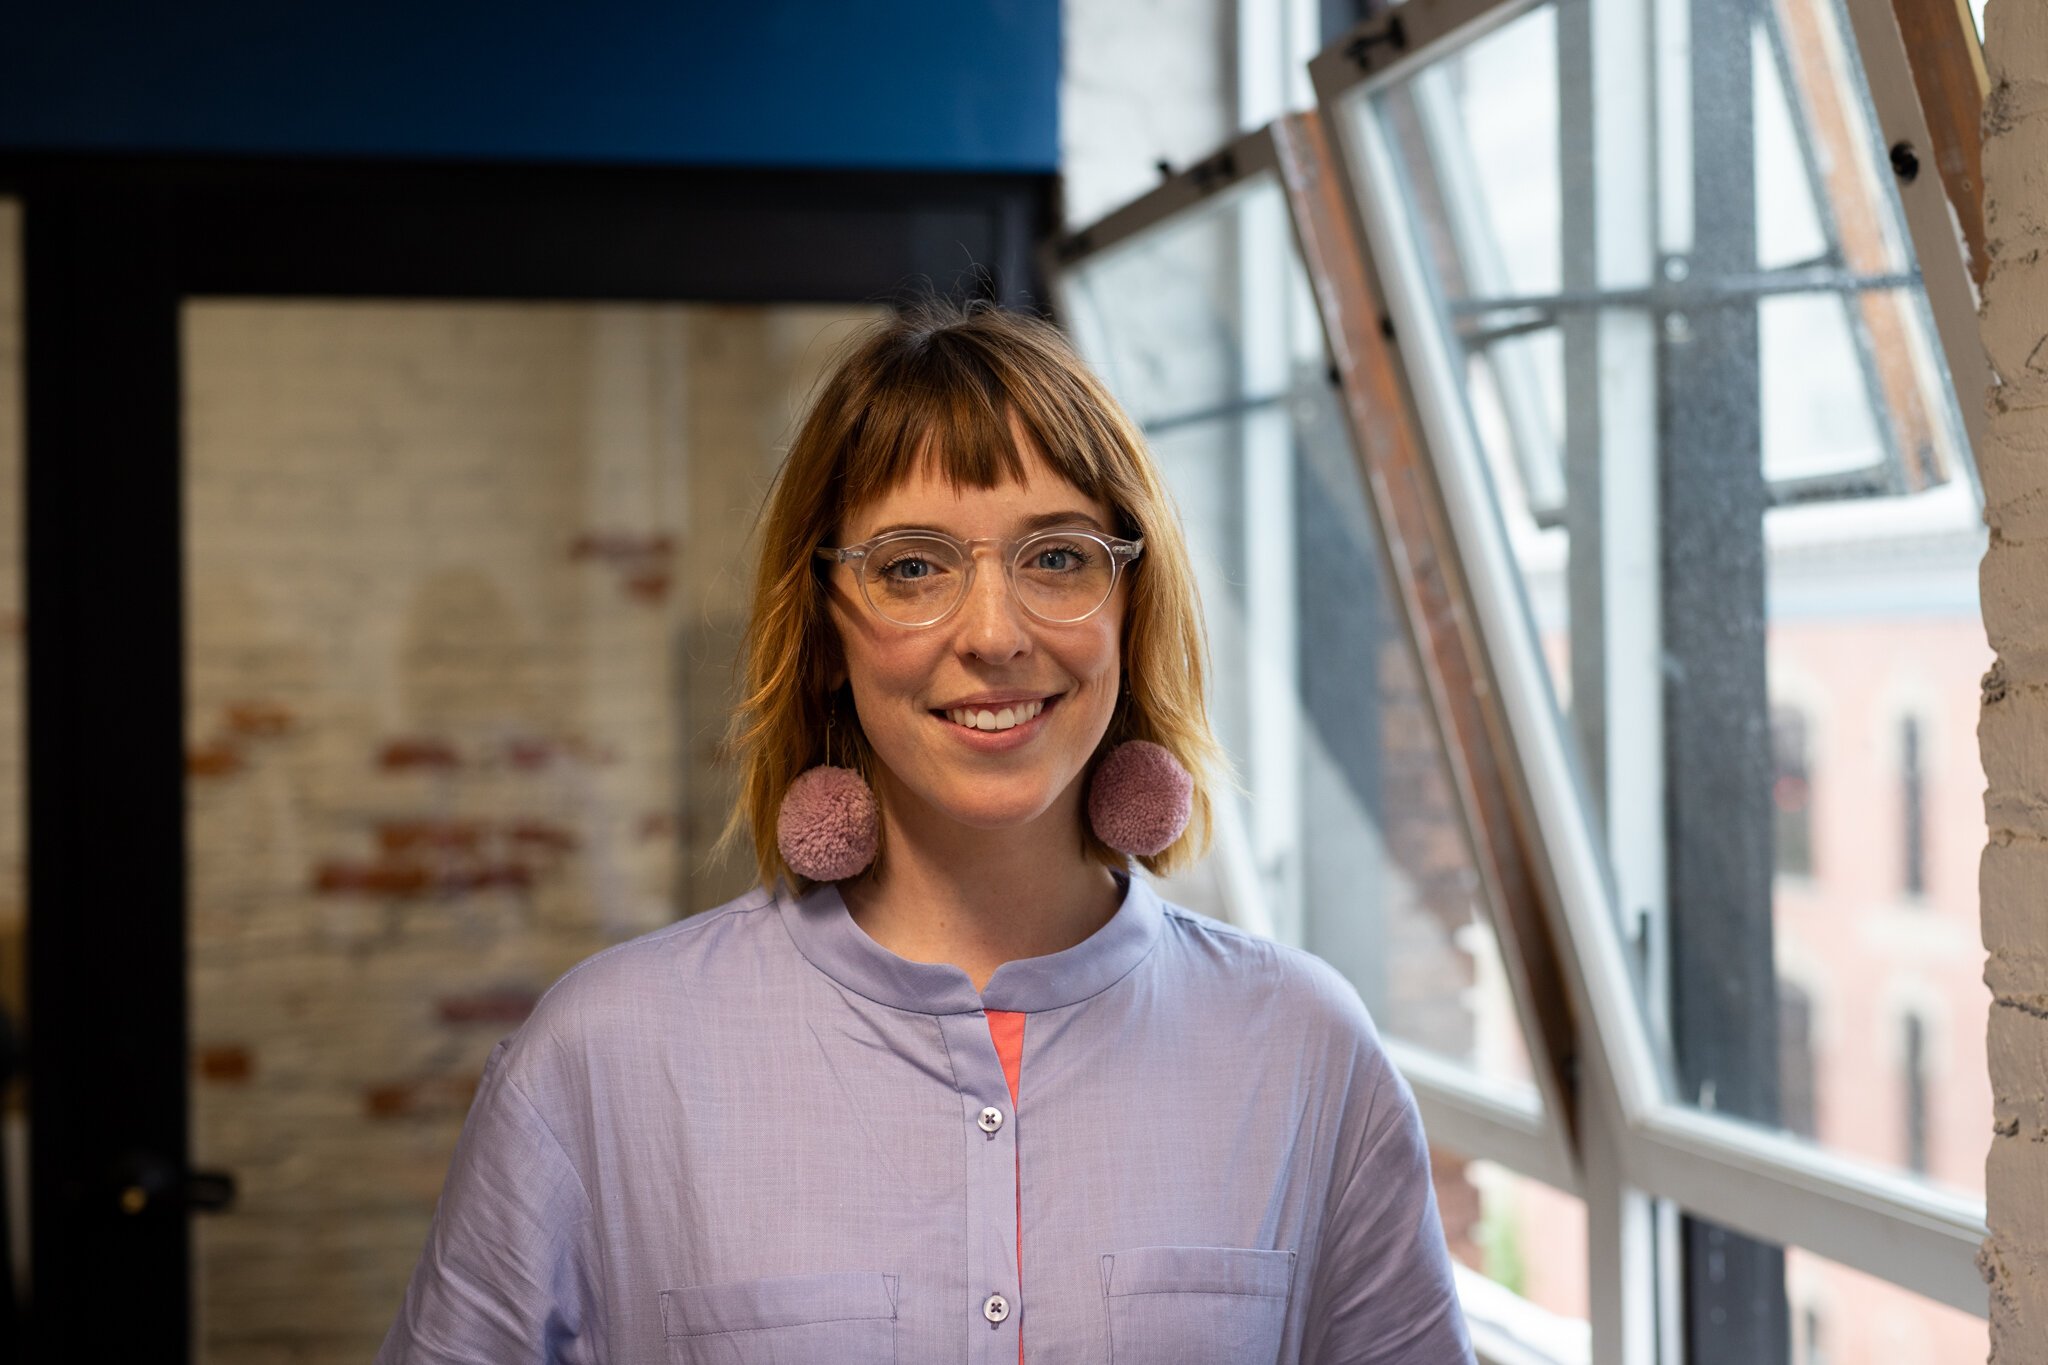 Kristin Giant is Chief Growth Officer at Pond, a tech startup in Fort Wayne.